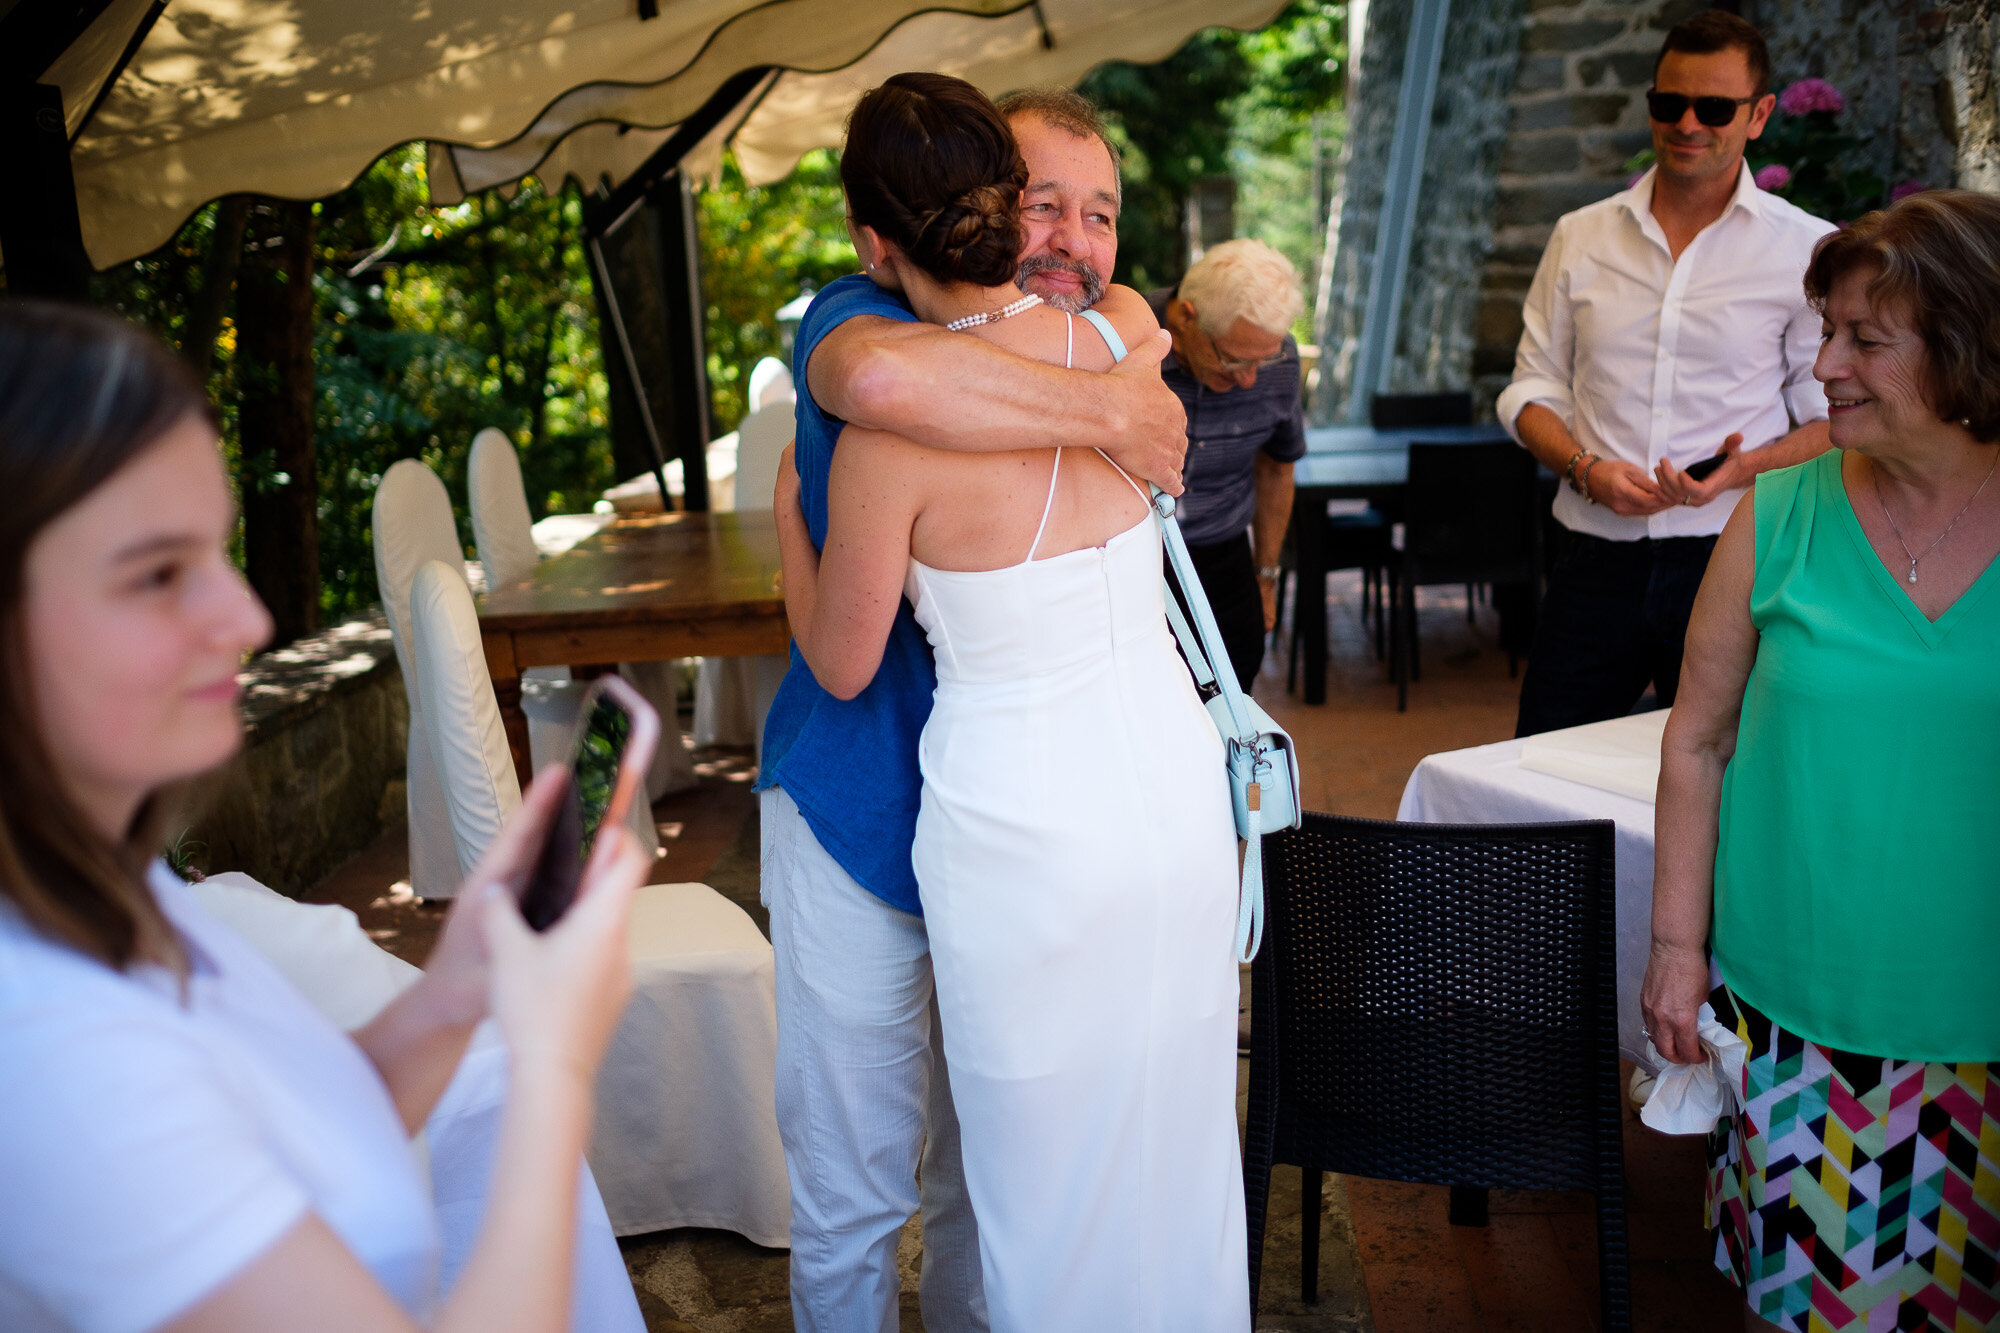  Elena receives a hug from her father before their civil ceremony during their Tuscany destination wedding by wedding photographer Scott Williams (www.scottwilliamsphotographer.com) 